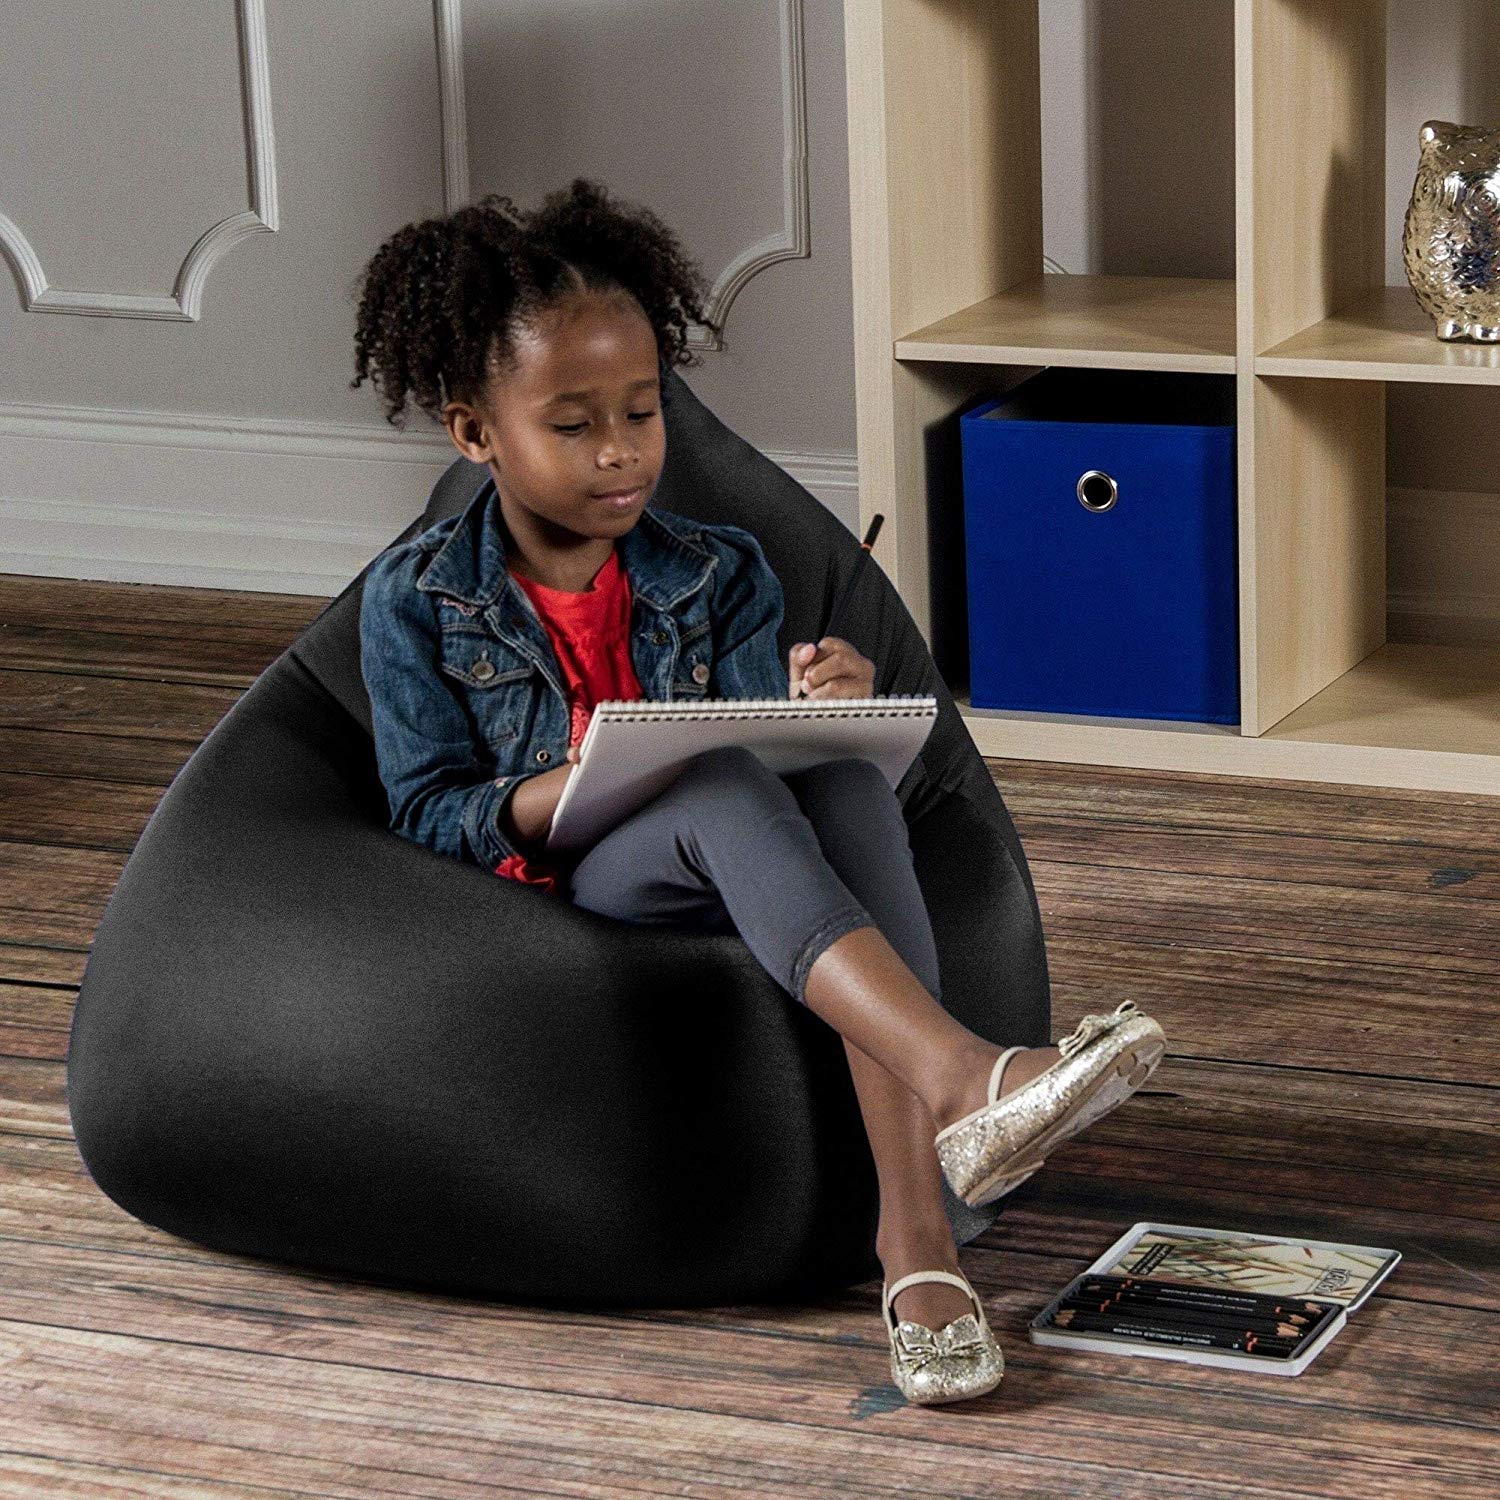 Giant Bean Bag Chairs for Adults » Petagadget